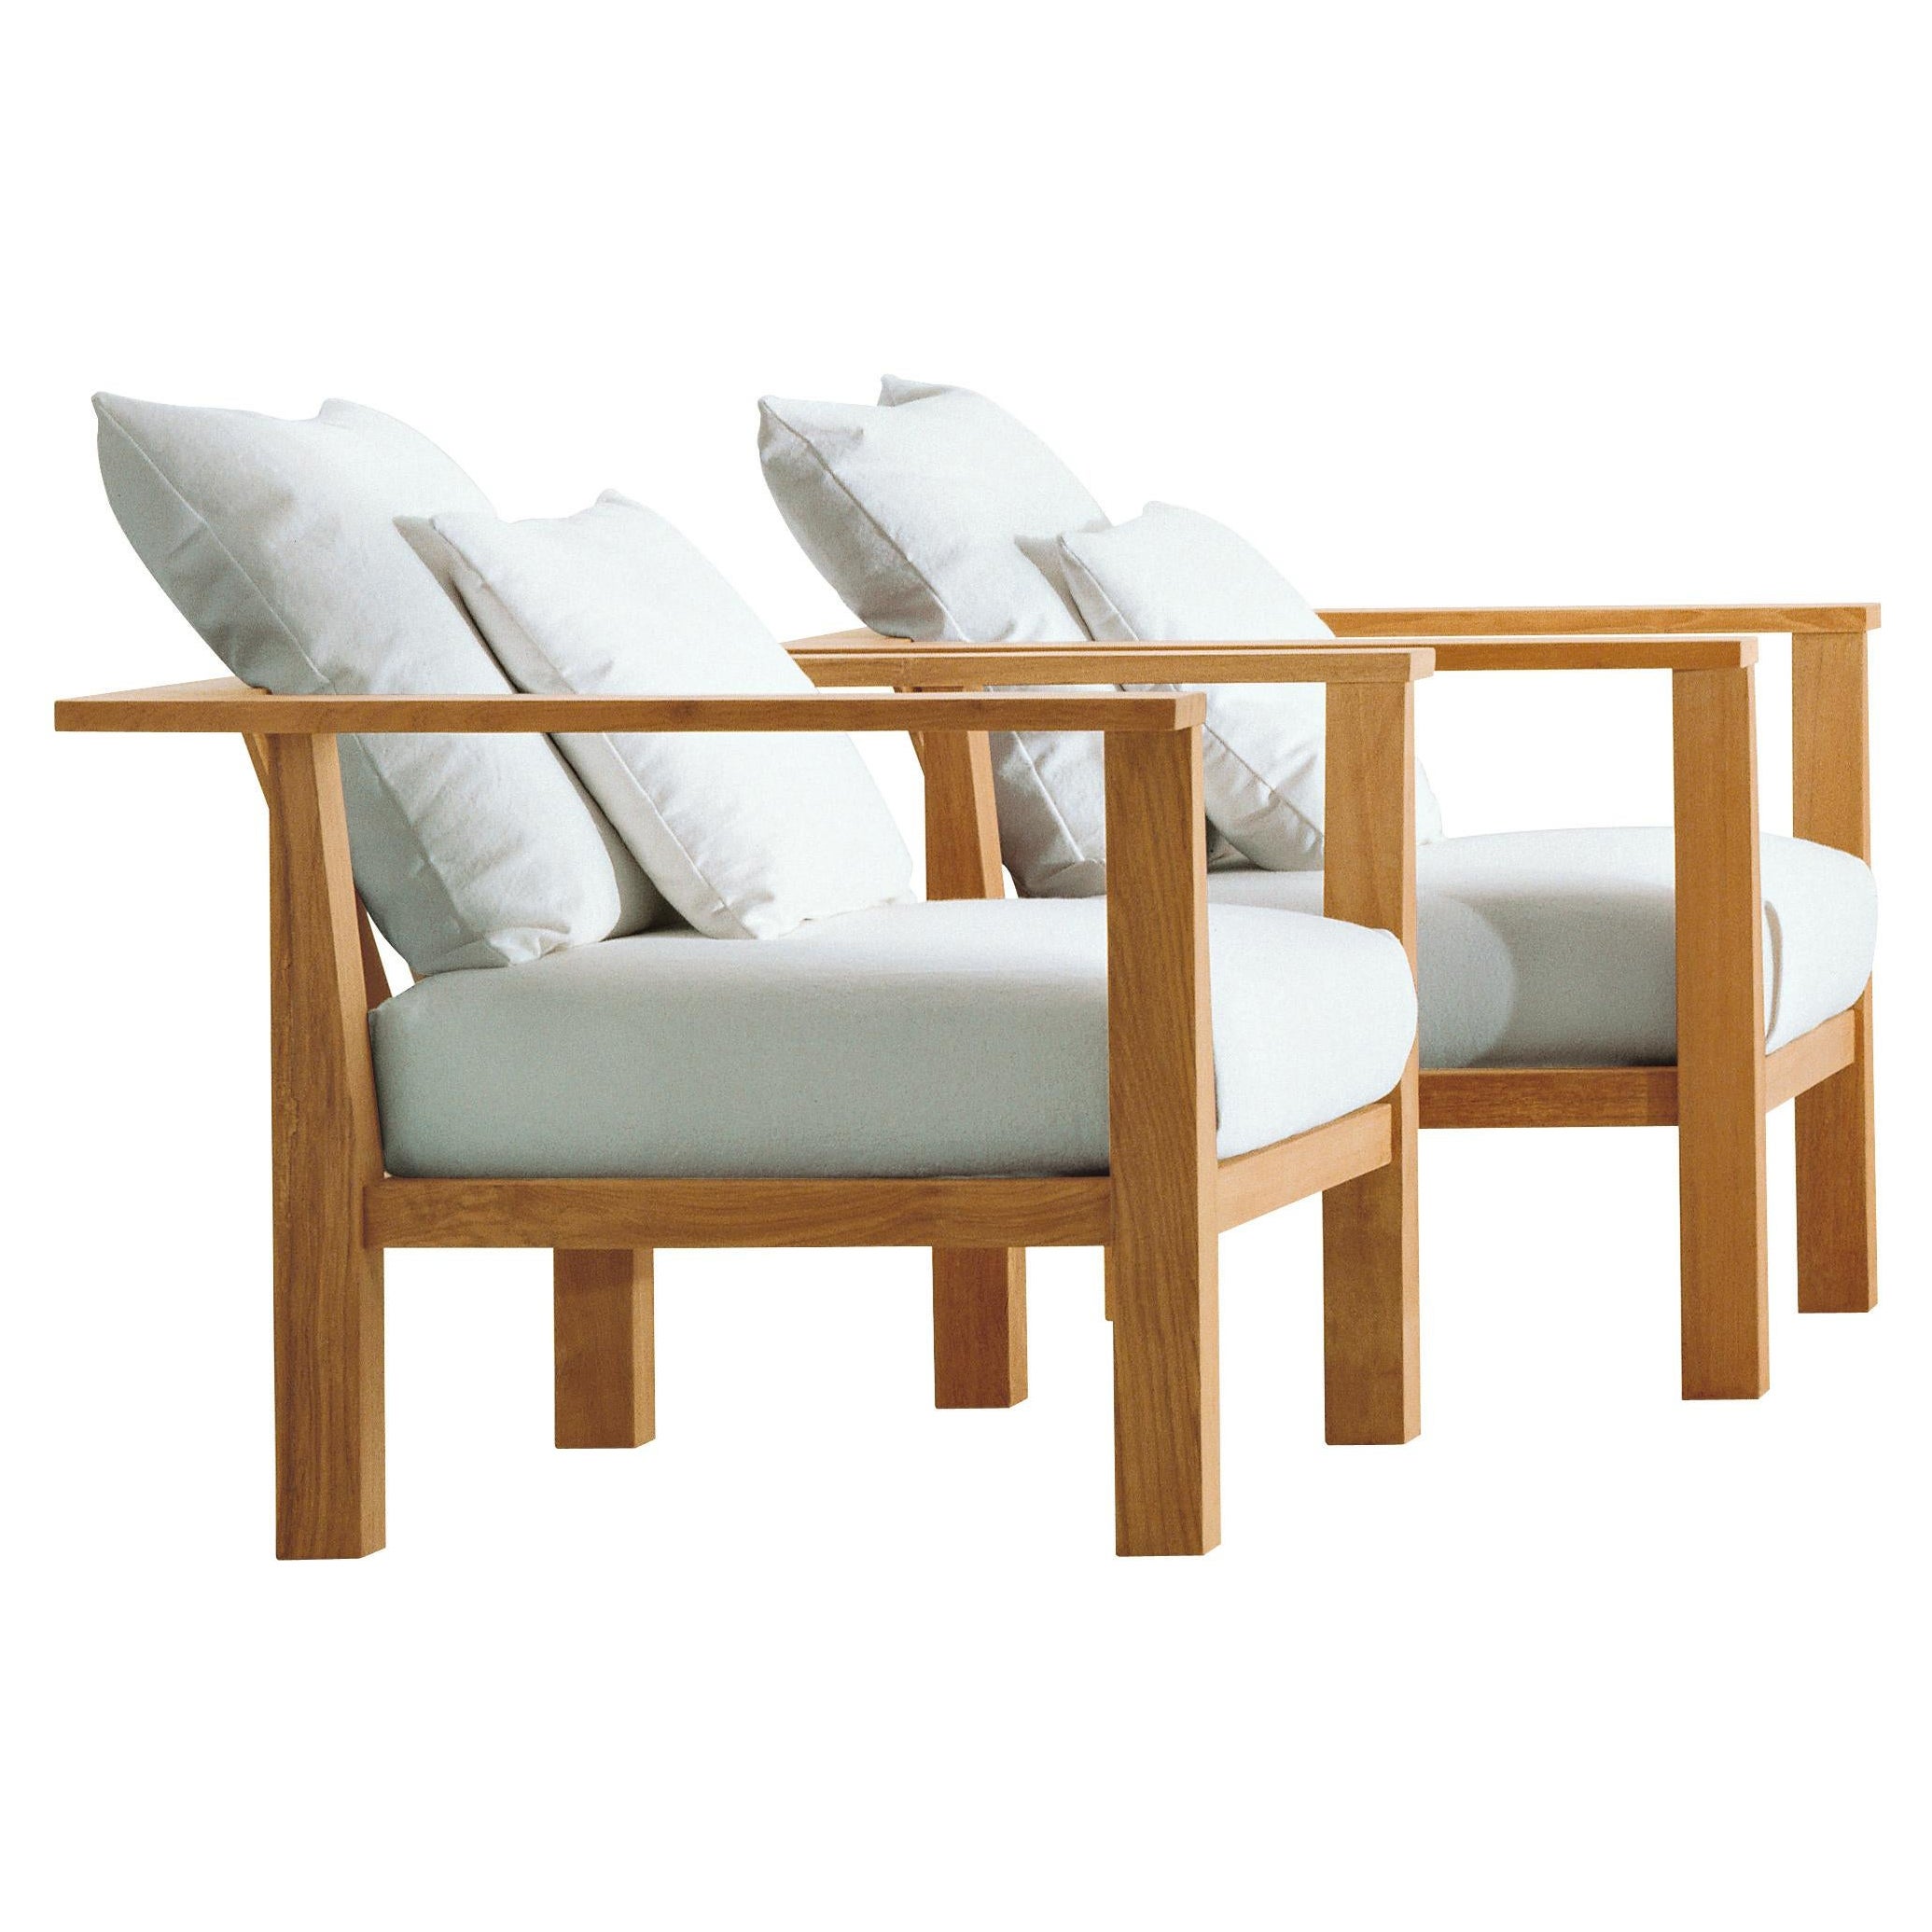 Gervasoni Inout 01 Armchair in Aspen 03 Upholstery with Natural Teak Frame For Sale